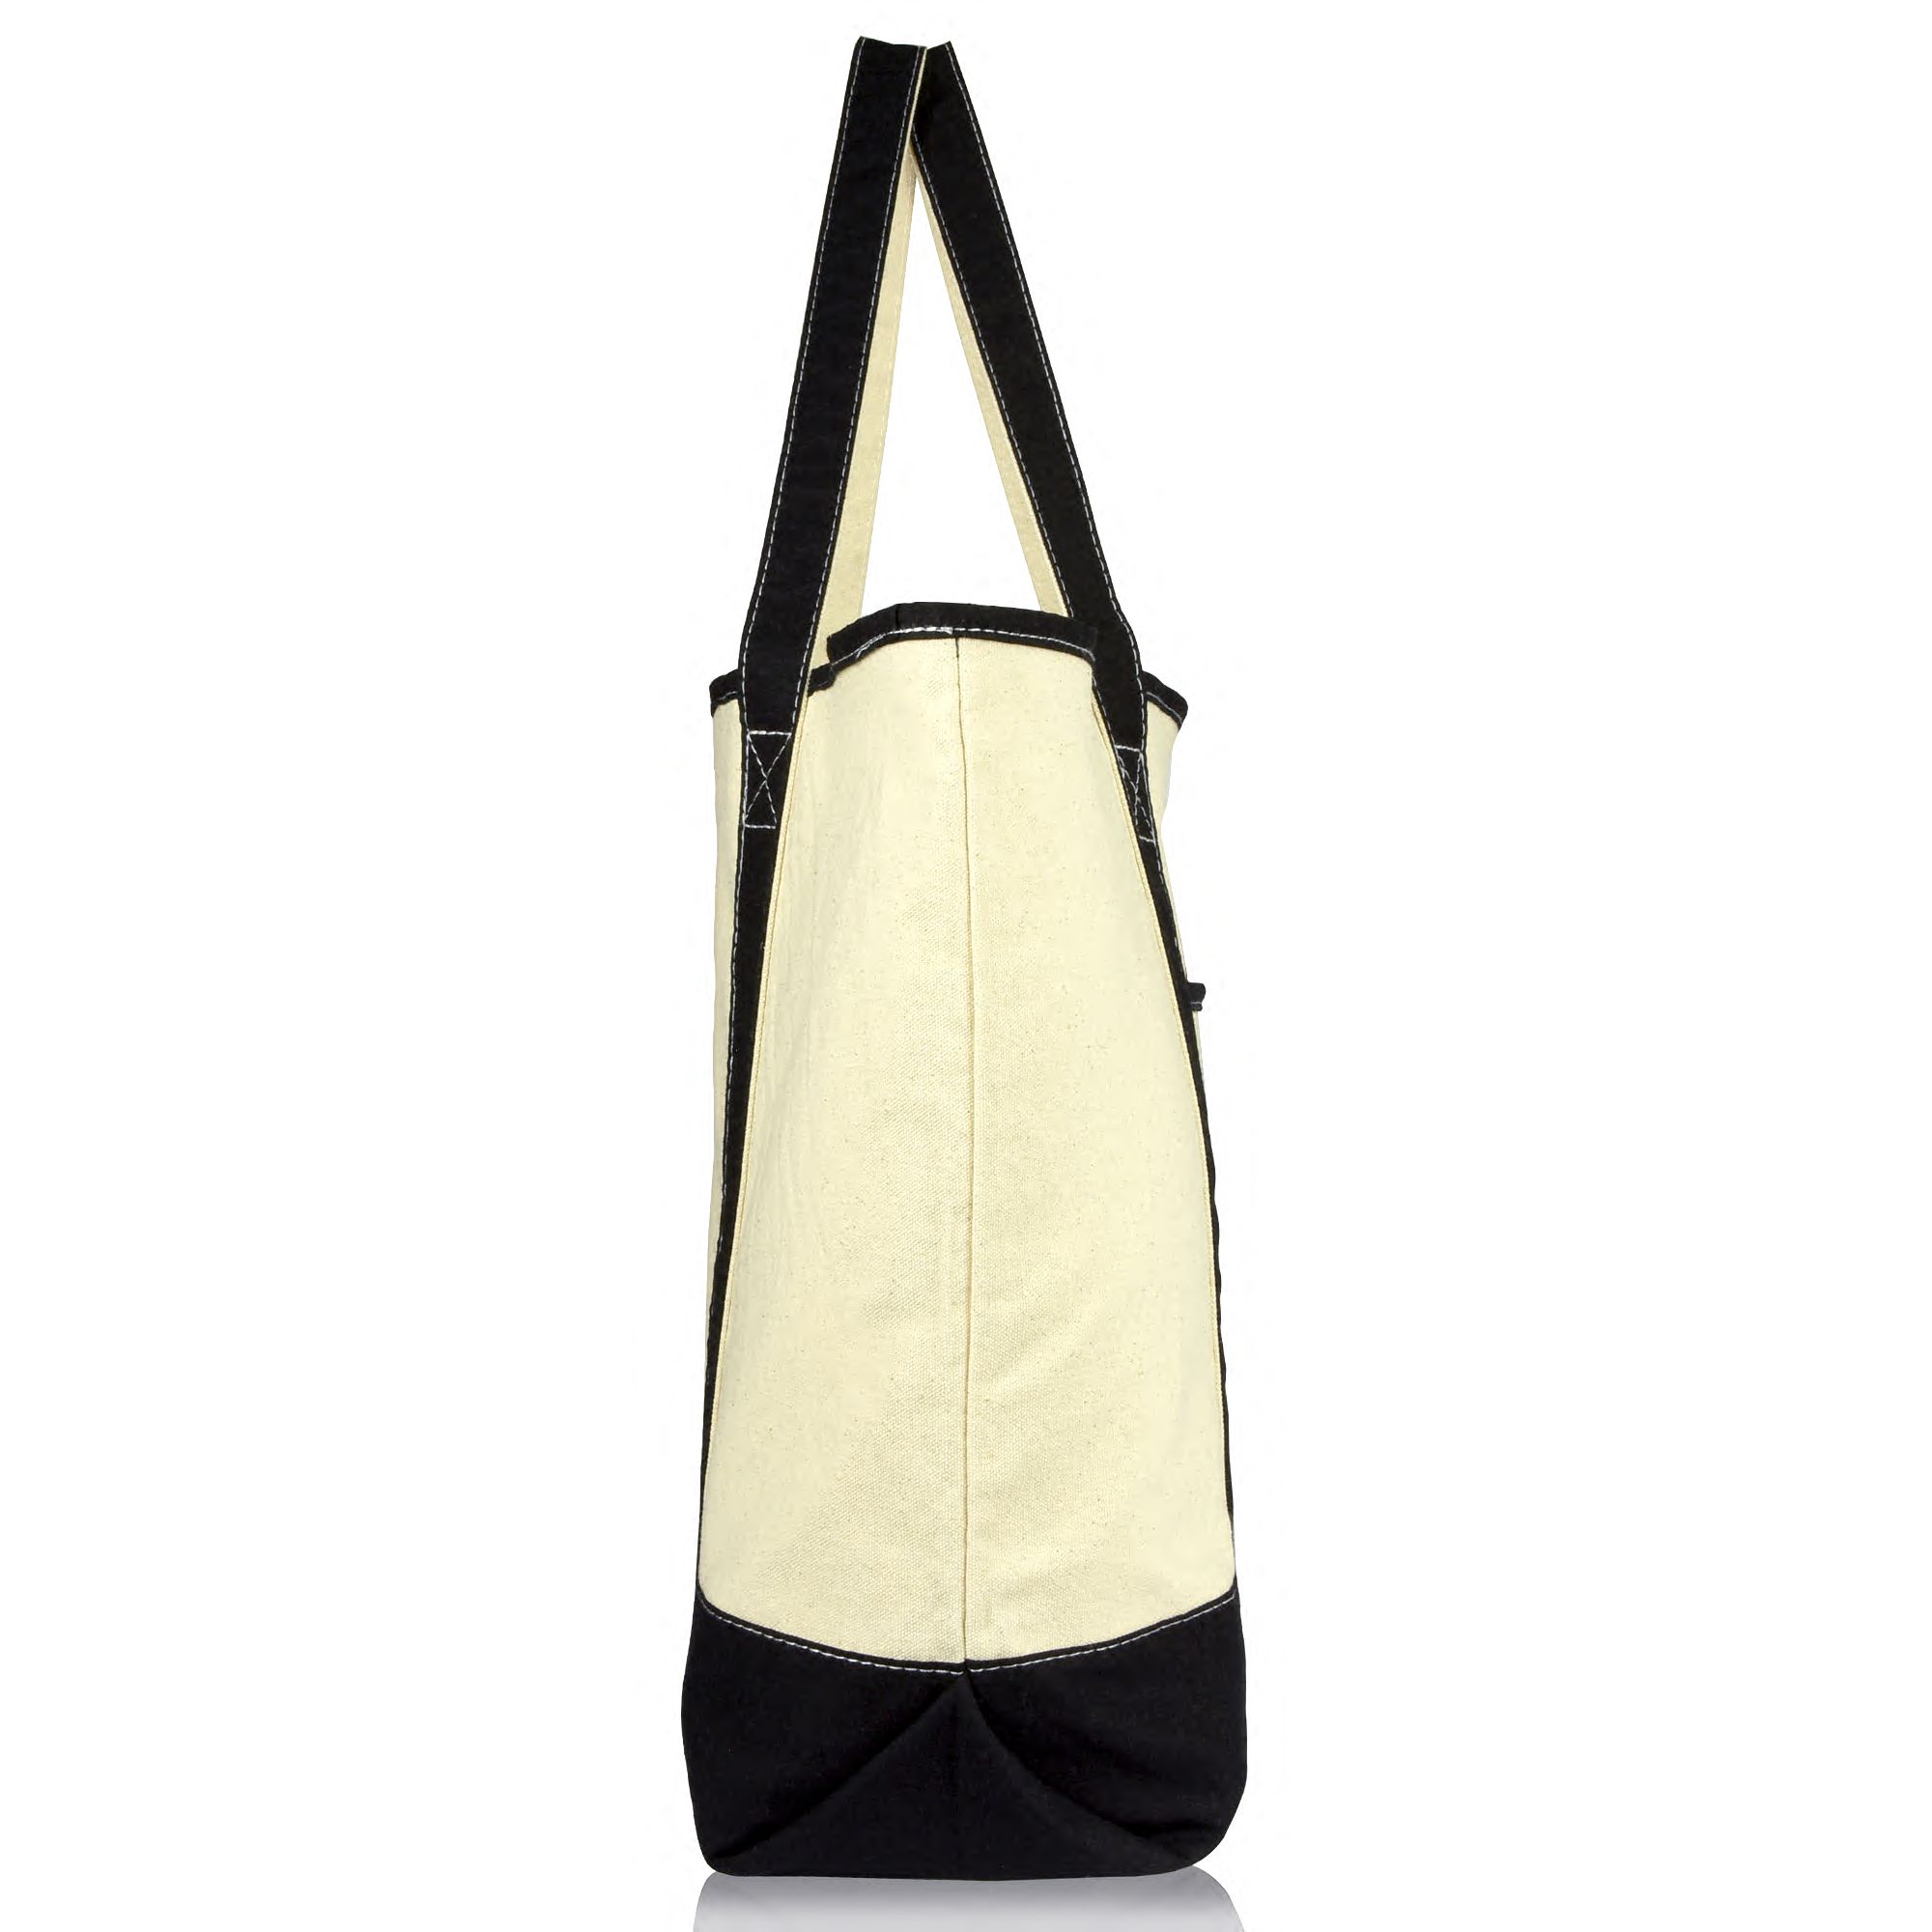 DALIX 22" Open Top Deluxe Tote Bag with Outer Pocket in Black - image 5 of 5